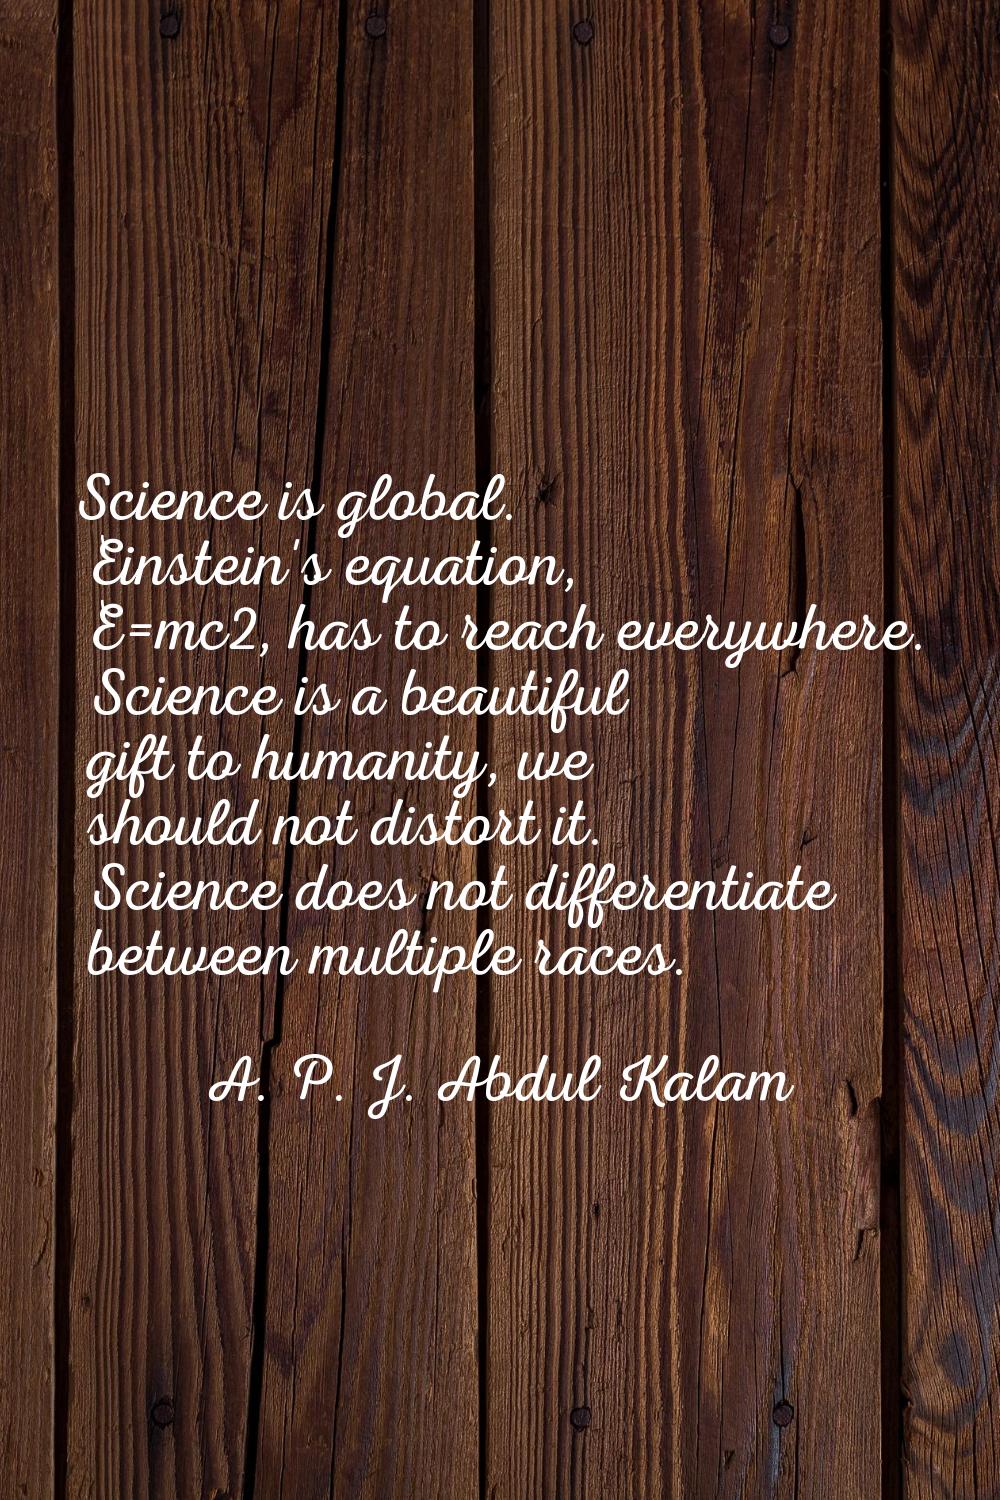 Science is global. Einstein's equation, E=mc2, has to reach everywhere. Science is a beautiful gift